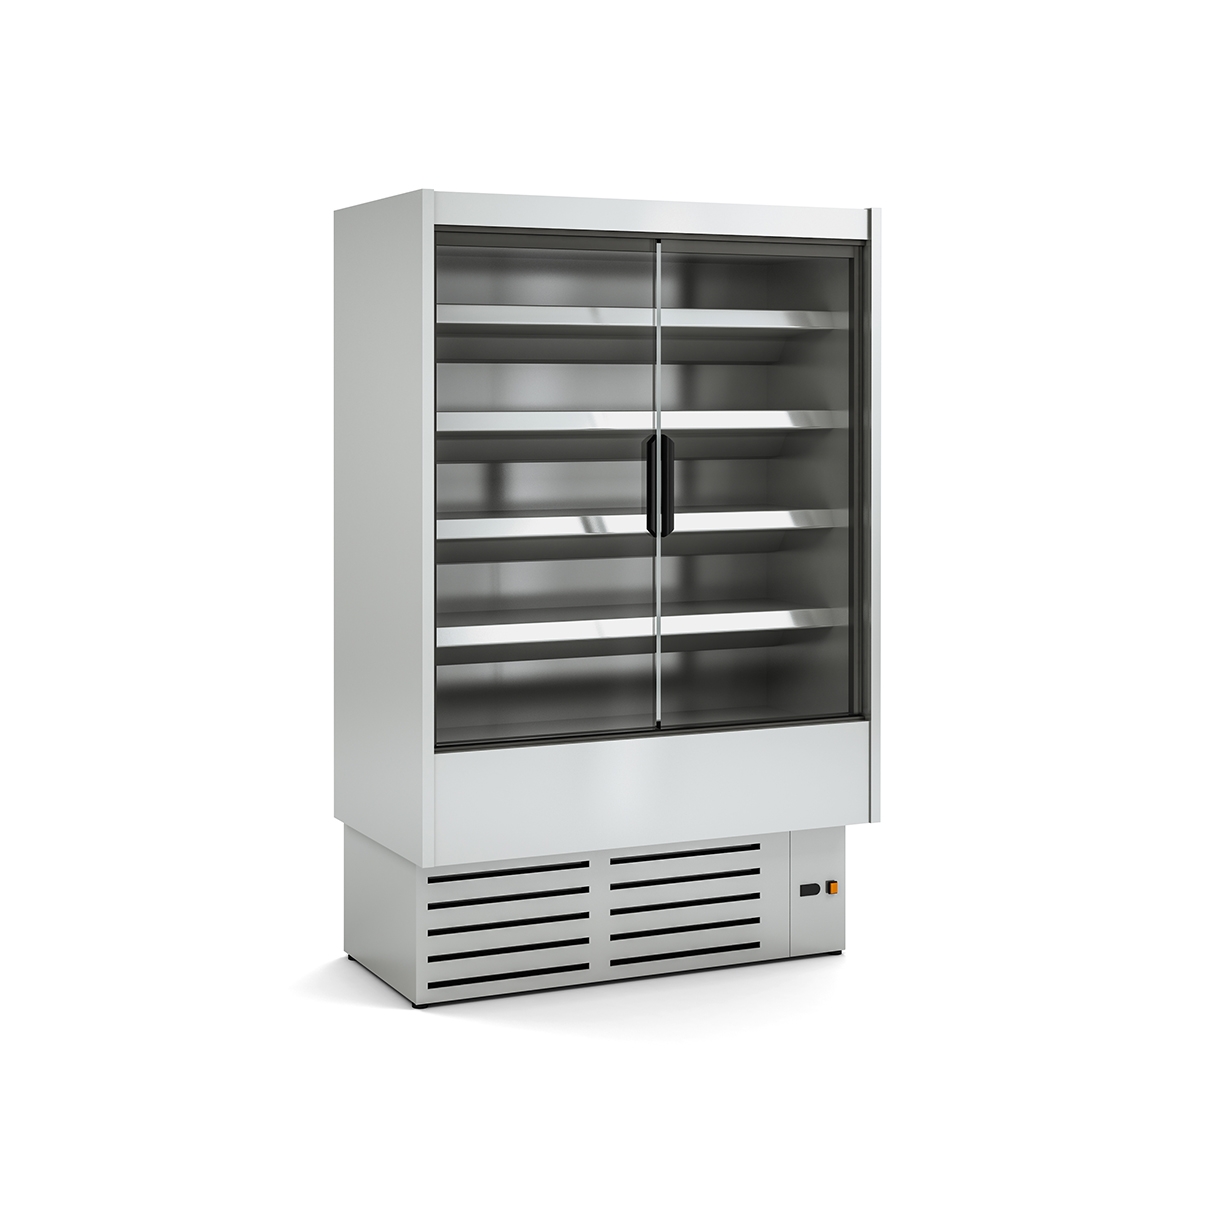 copy of REFRIGERATED WALL-MOUNTED DISPLAY CABINET DG0 I M1-M2